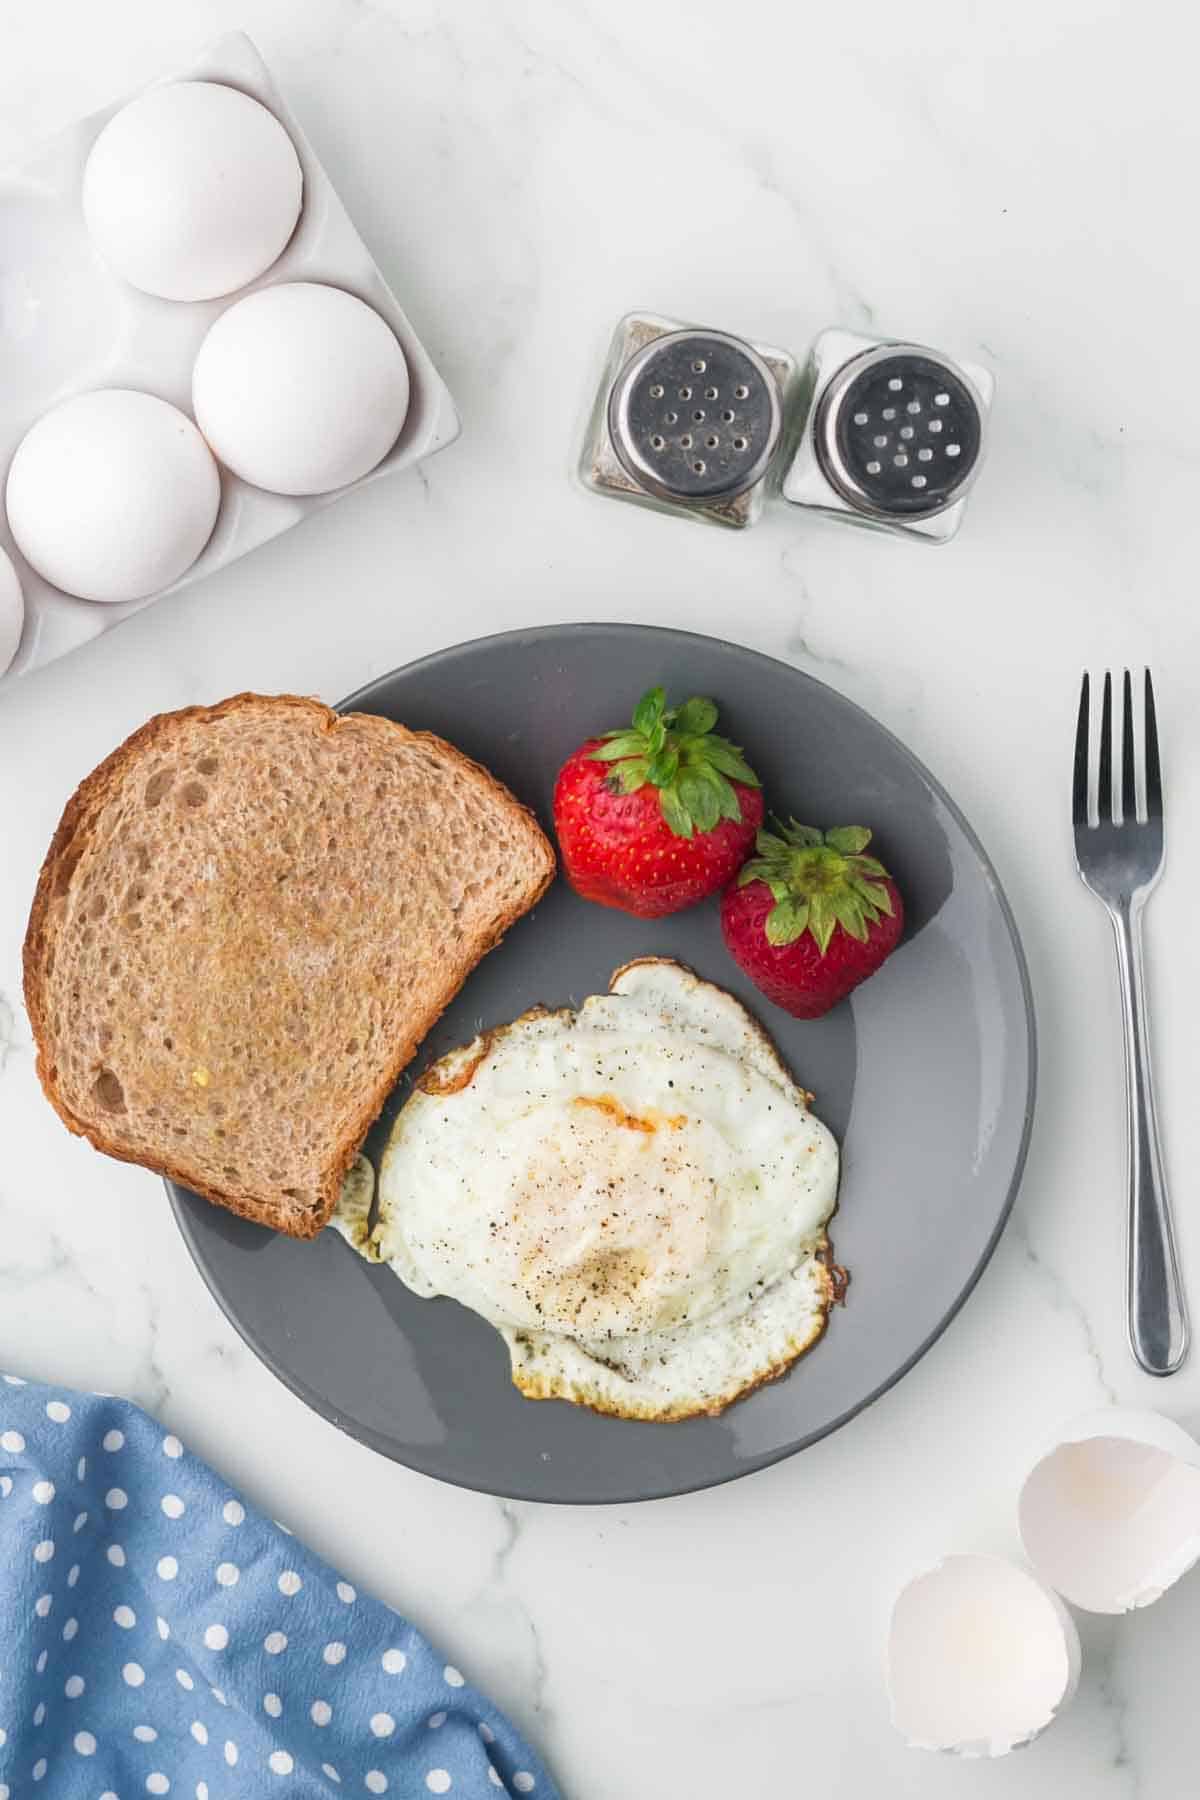 grey plate with toast and a fried egg on the side with strawberries